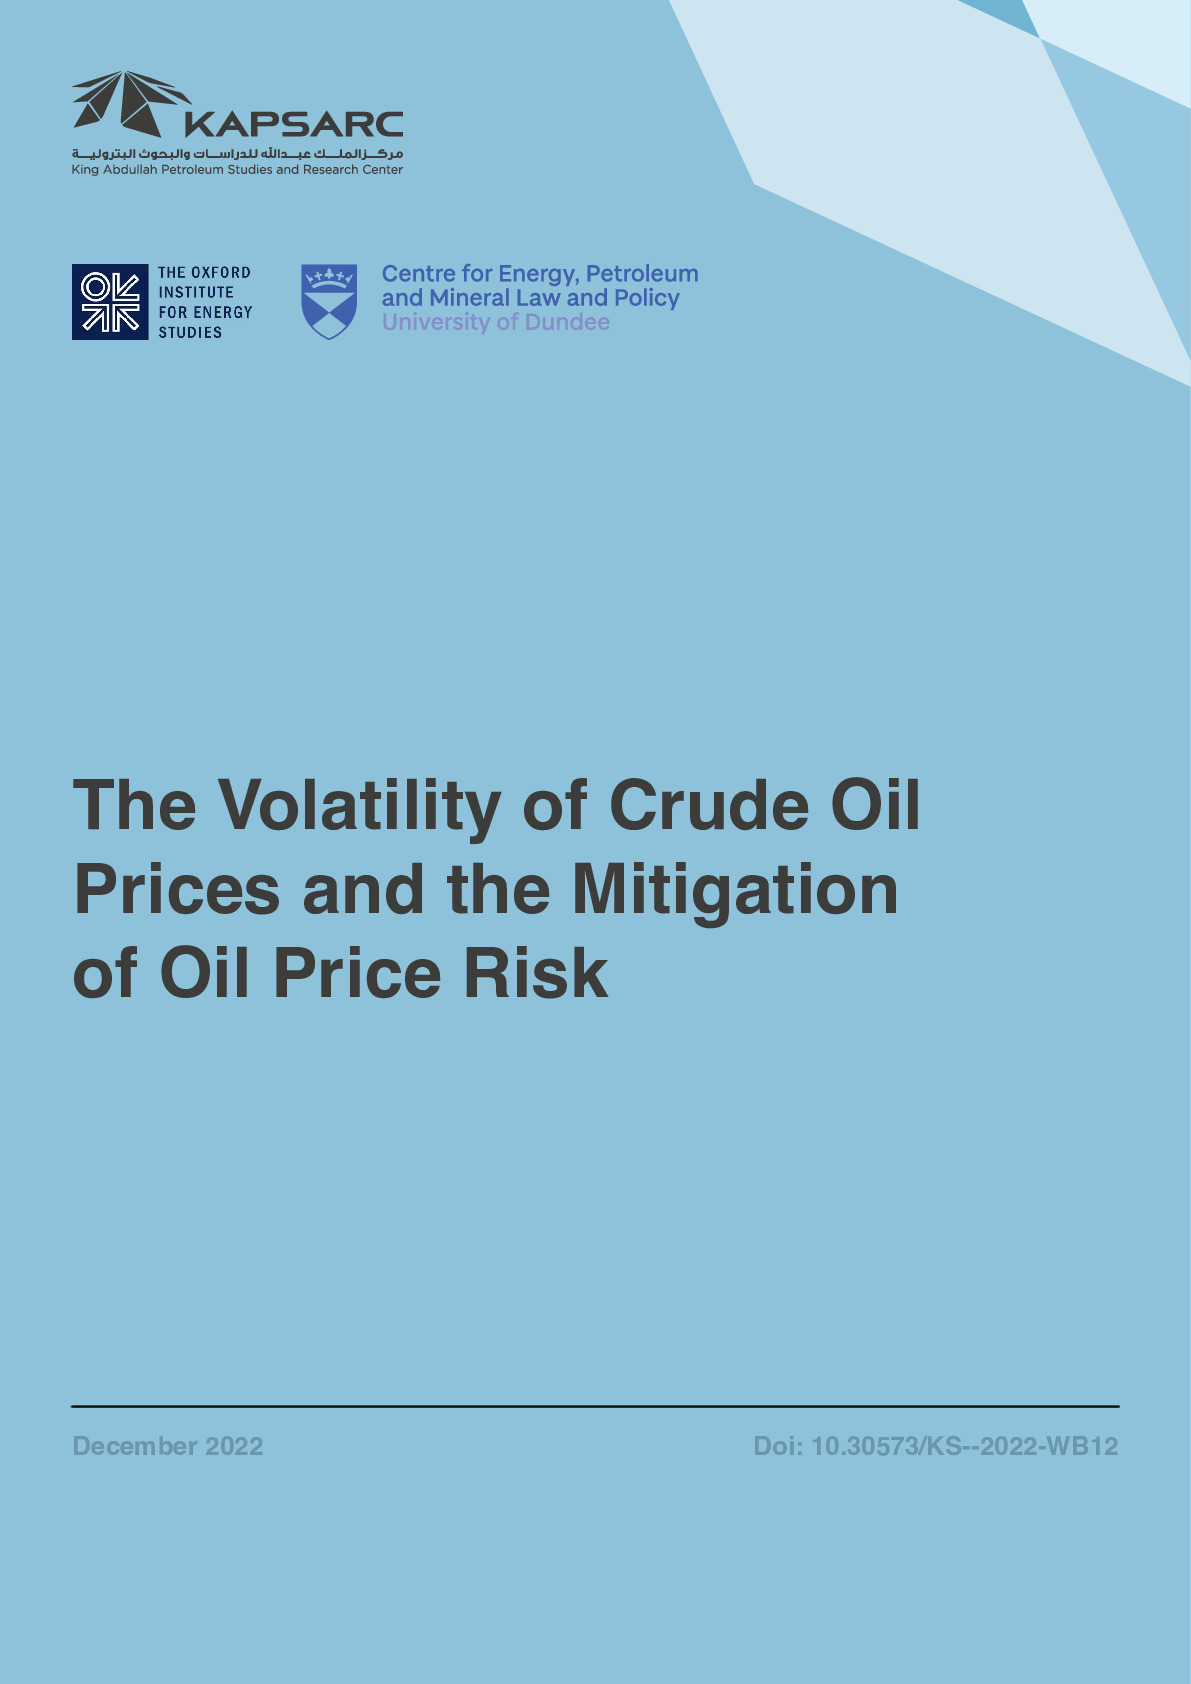 The Volatility of Crude Oil Prices and the Mitigation of Oil Price Risk